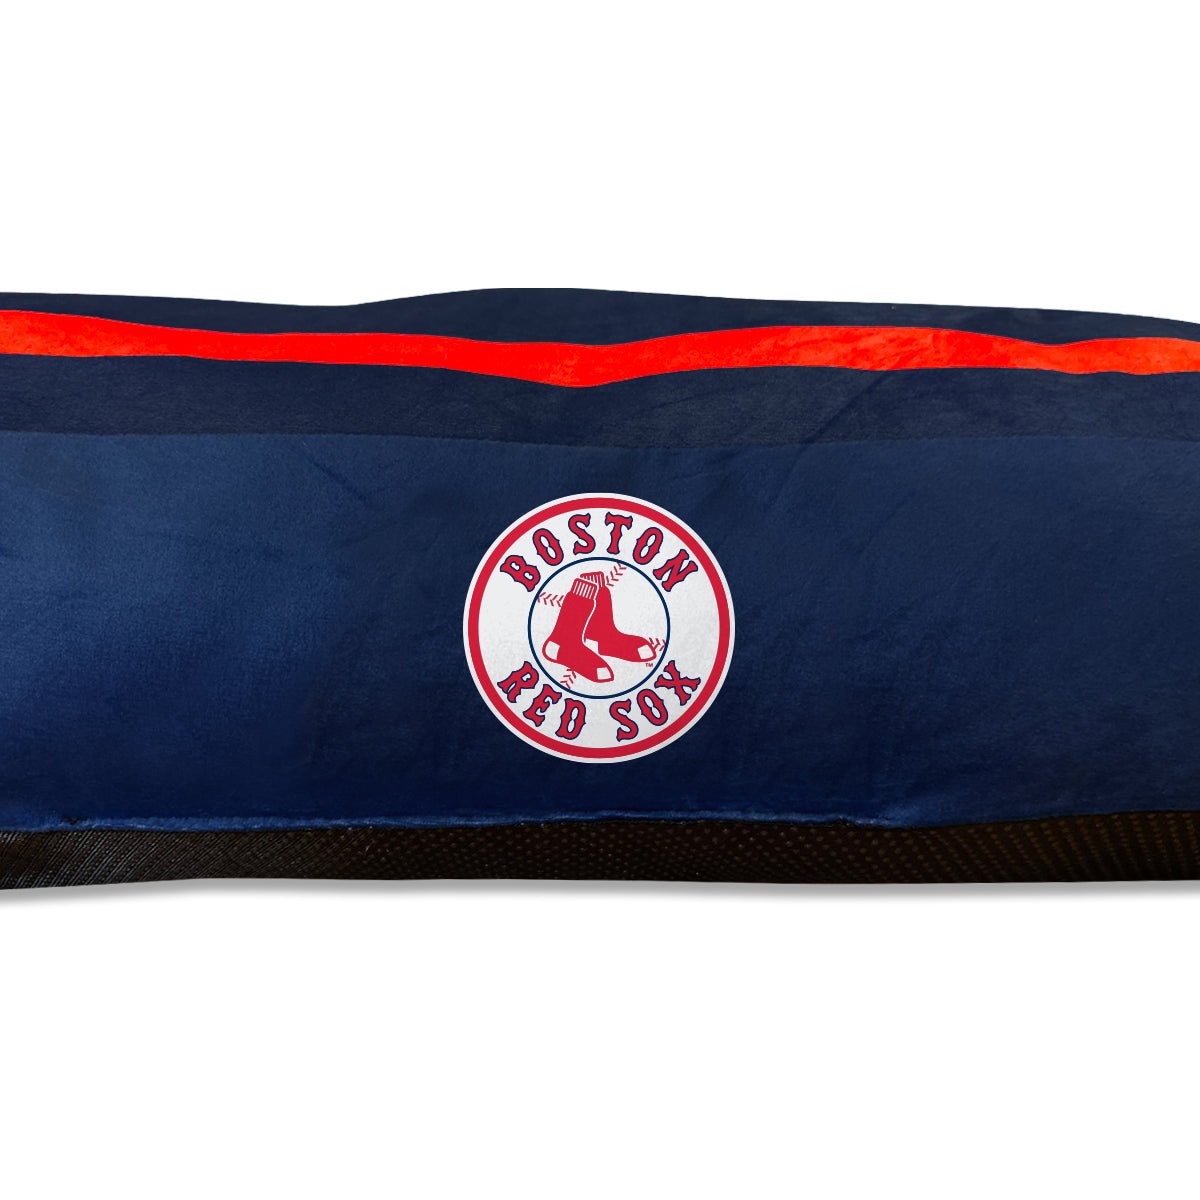 MLB Boston Red Sox Home Plate Bed